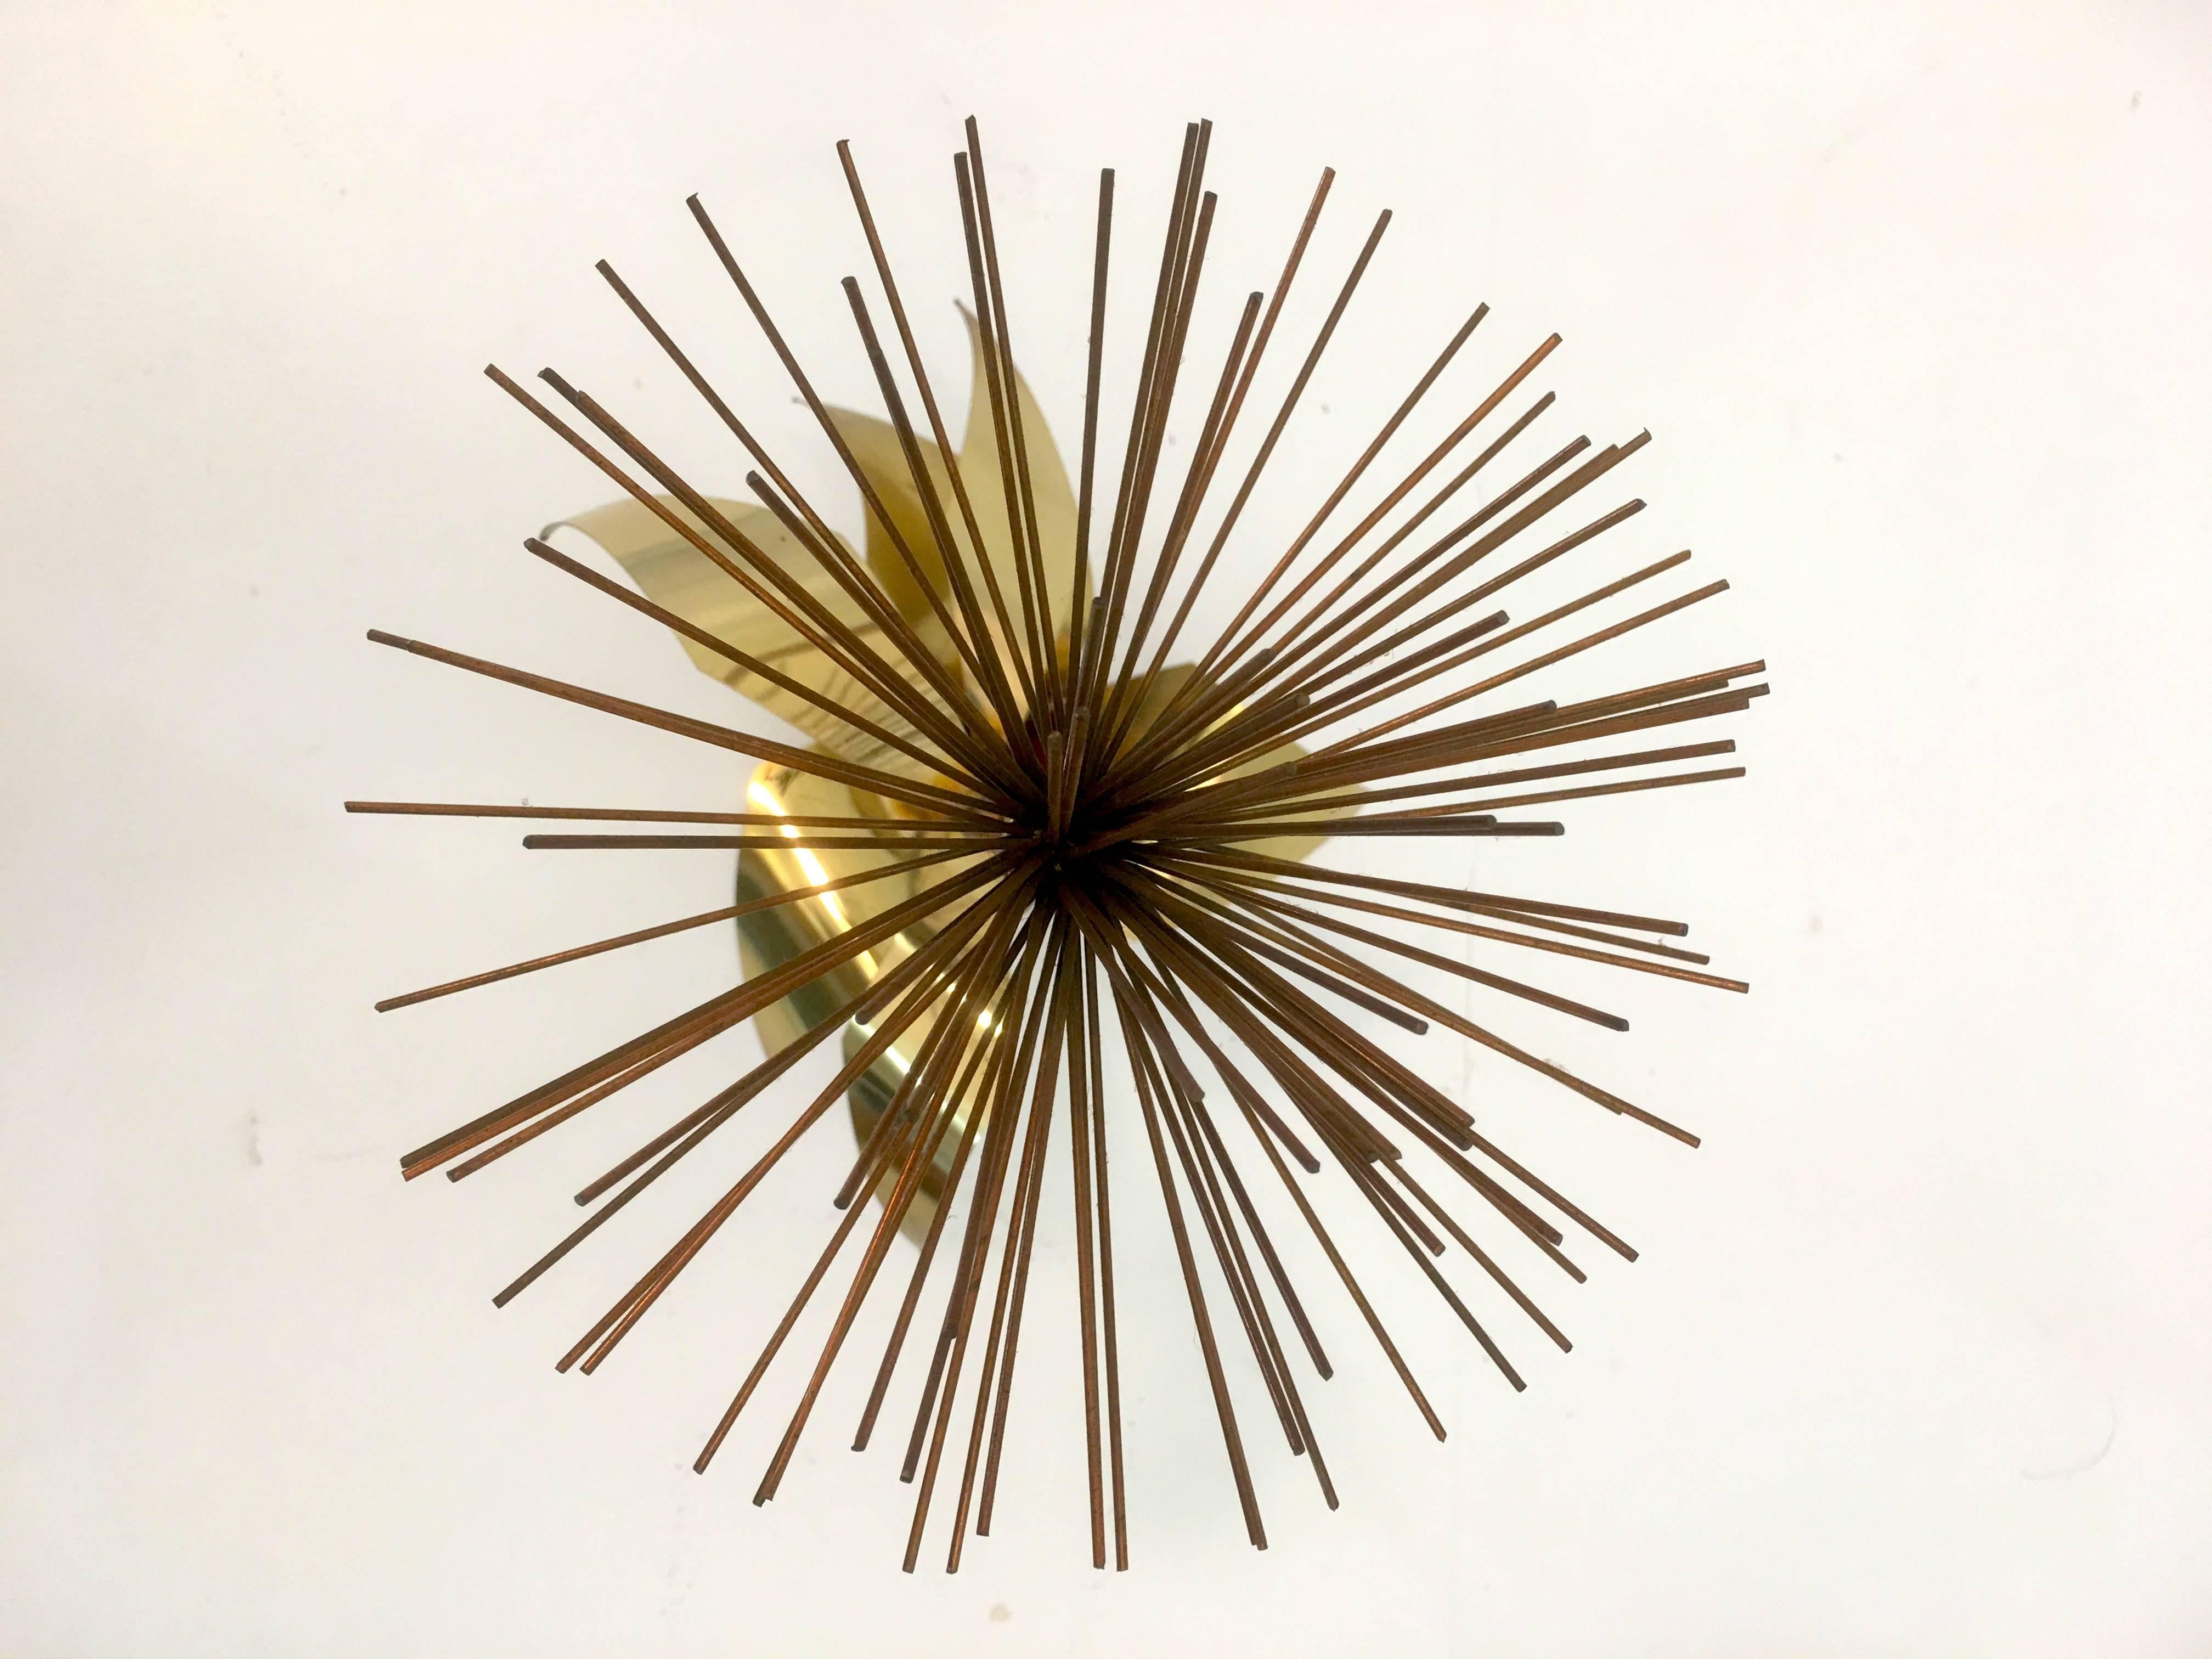 Curtis Jere, signed
Measures: 19 tall and 10 inches wide and deep.
USA, circa 1980.

Signed but undated and likely produced 1979-1981, this sculpture by C. Jere is a mixed metal sculpture deploying copper, brass and steel to create what is